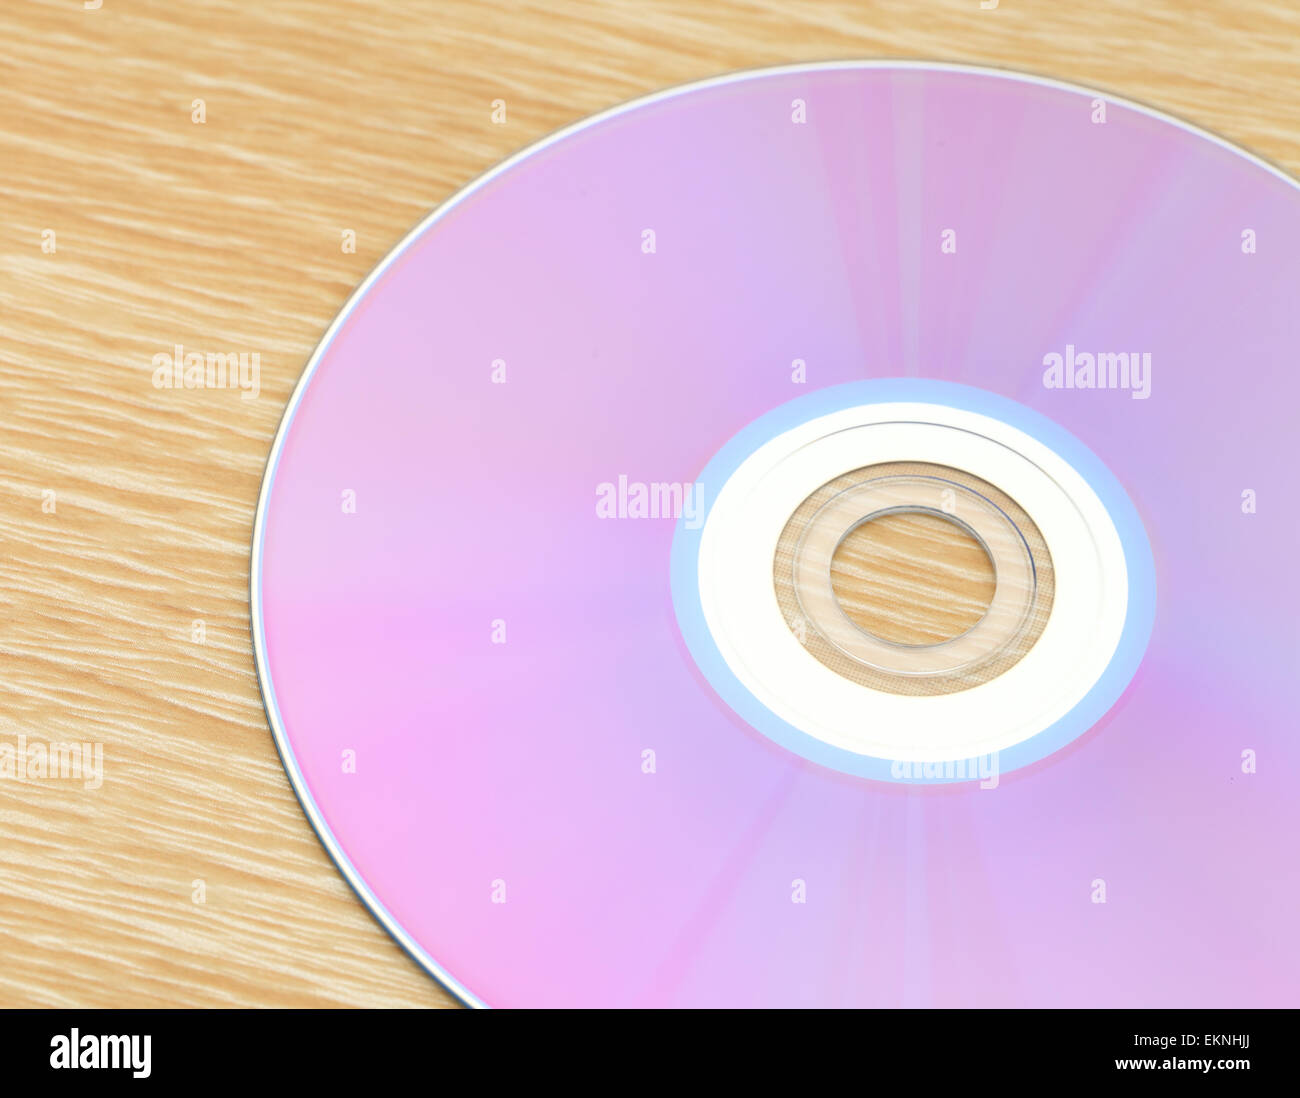 CD on table Stock Photo